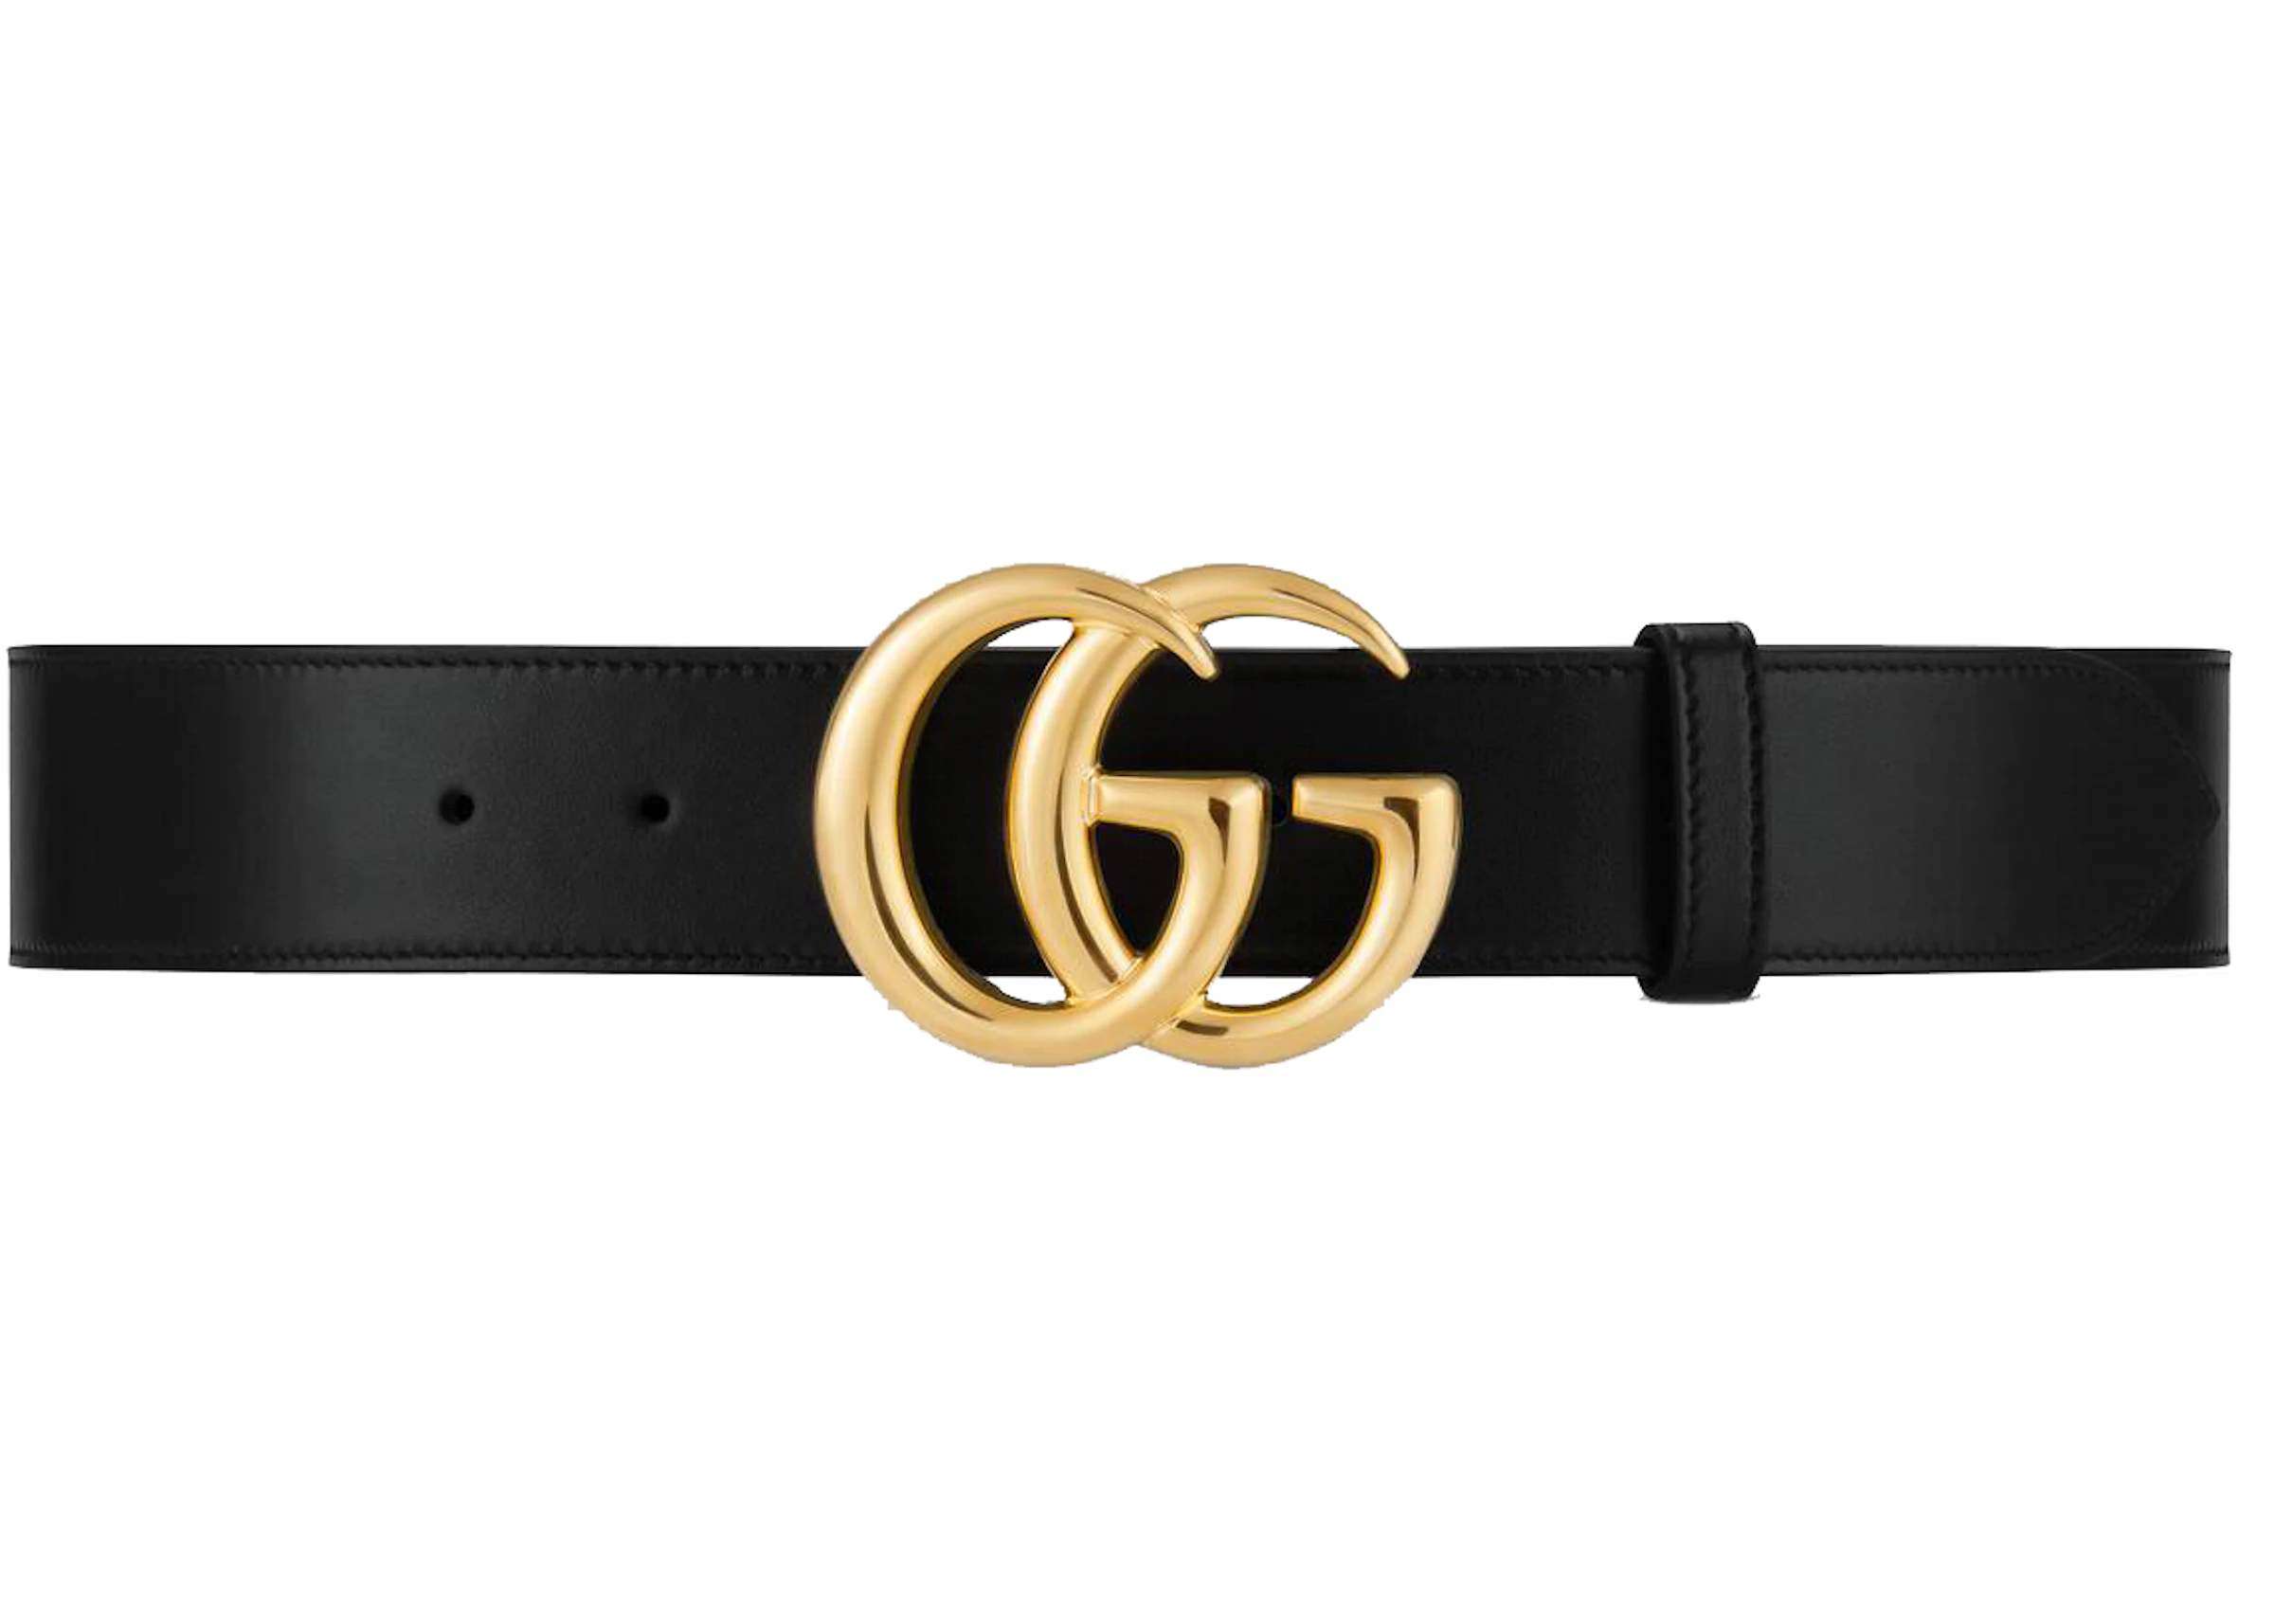 Tahiti Oh jee Kroniek Gucci GG Marmont Belt Shiny Buckle 1.5 Width Black in Calfskin Leather with  Aged Gold-tone - US